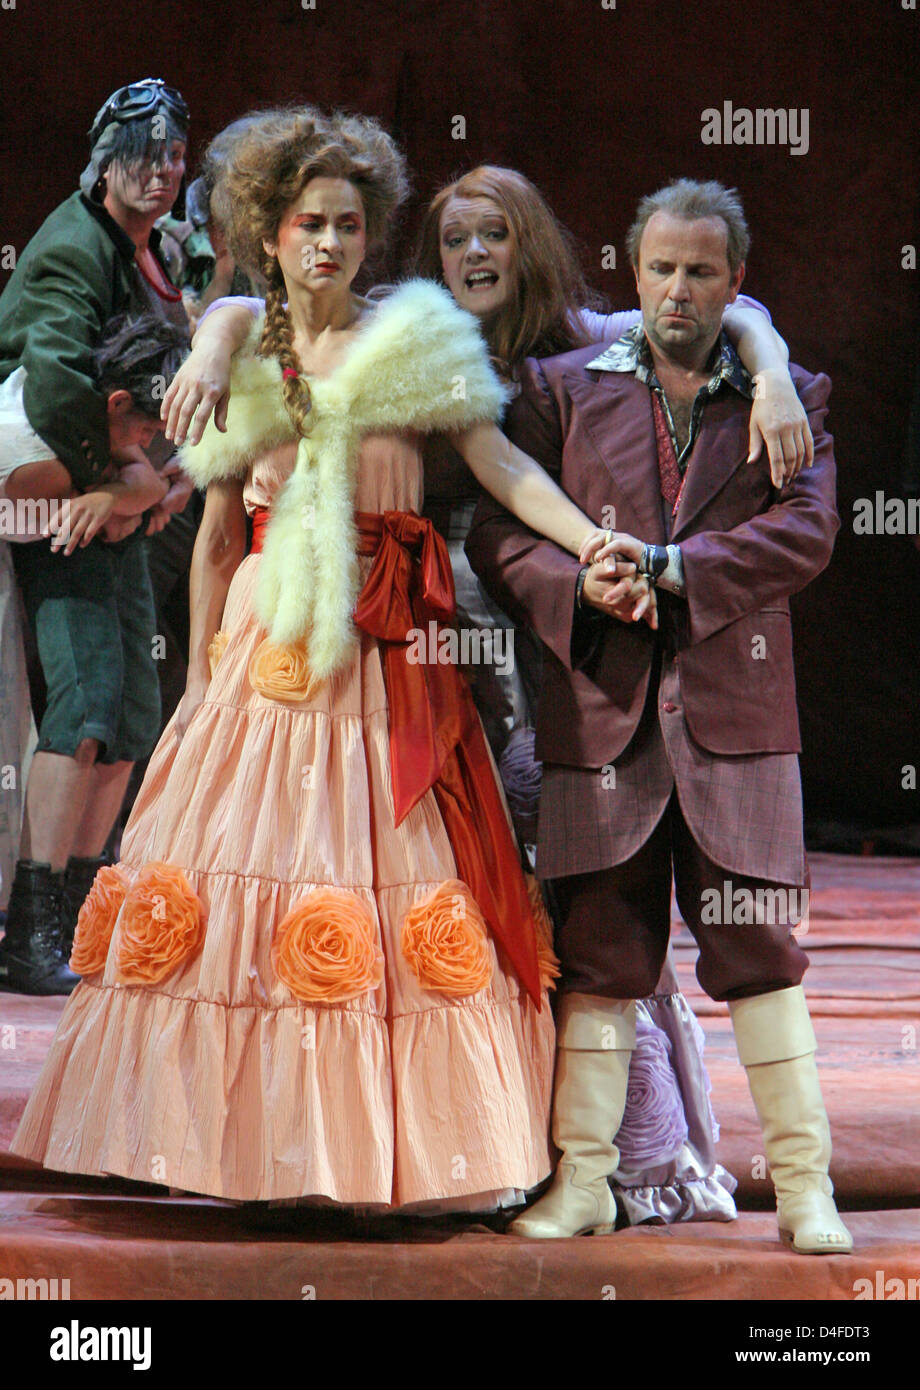 Catherine Foster as Bruennhilde (C), Norbert Schmittberg as Siegfried and Marietta Zumbuelt as Gudrune (L) perform a scene of 'Goetterdaemmerung' ('Twilight of the Gods'), the last of the four operas that comprise 'Der Ring des Nibelungen' ('The Ring of the Nibelung') by Richard Wagner during the dress rehearsal at the German National Theatre in Weimar, Germany, 30 June 2008. The o Stock Photo